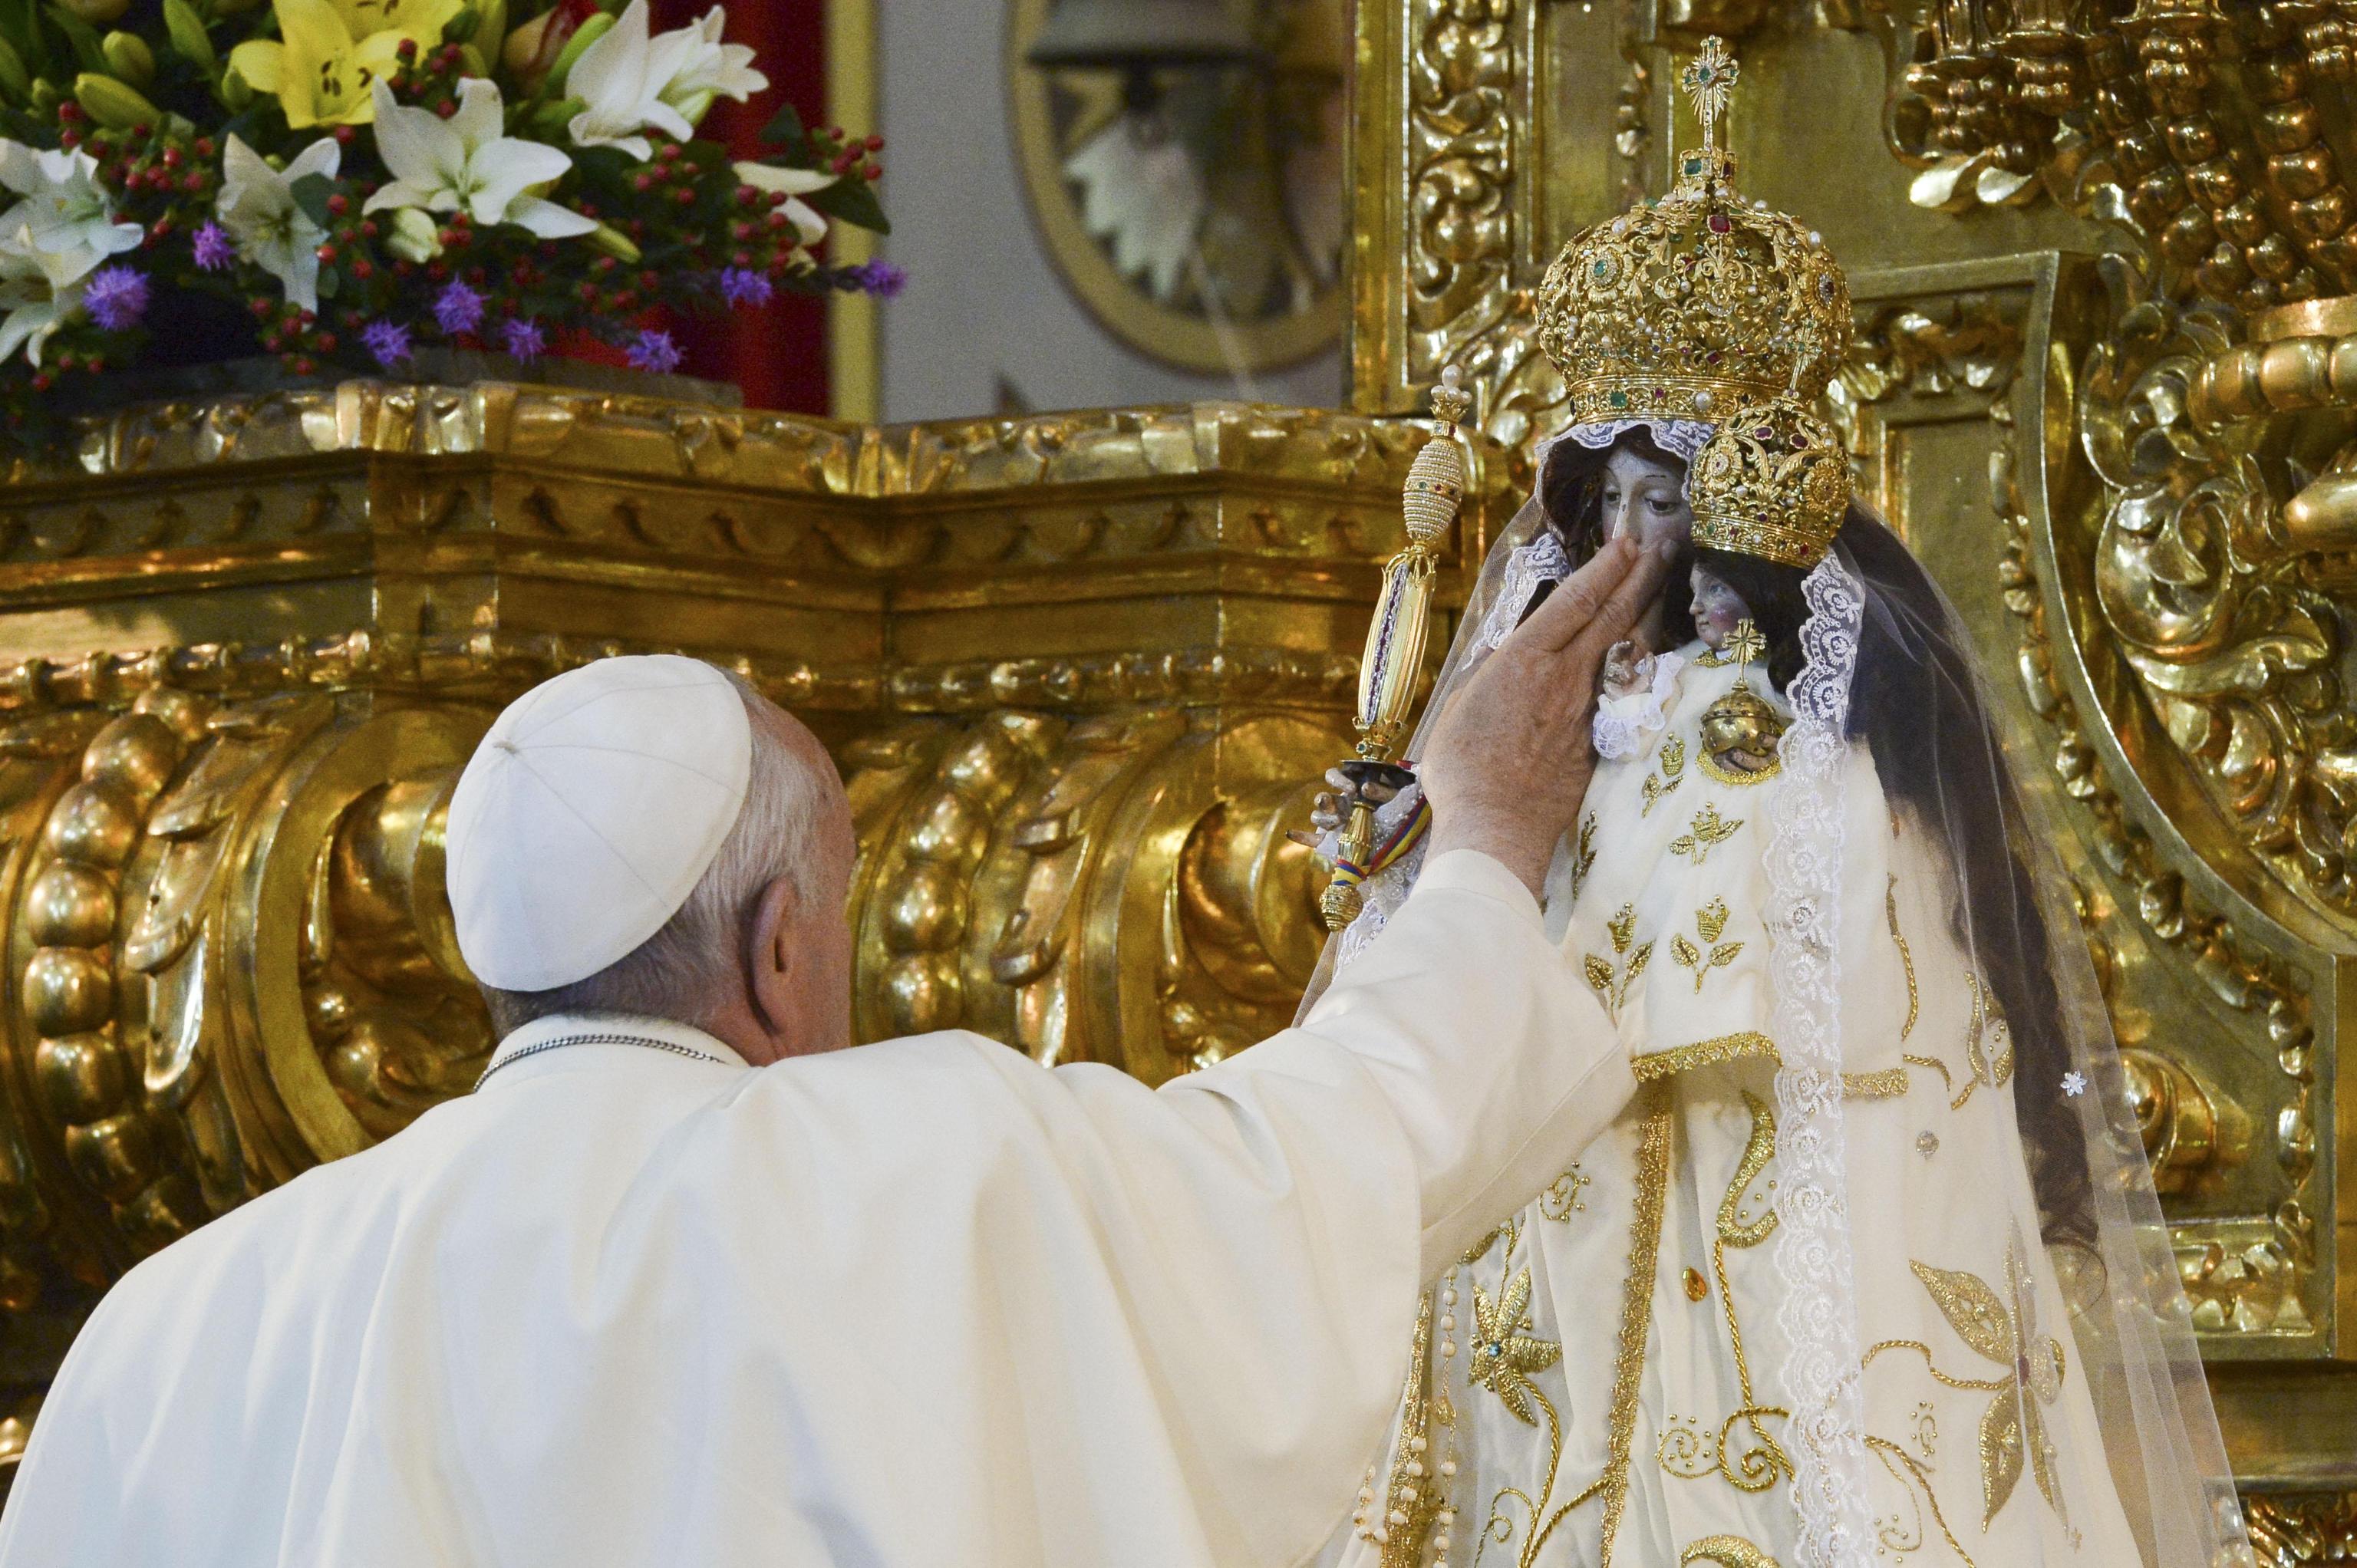 Pope Francis caresses the statue of Our Lady of Quinche